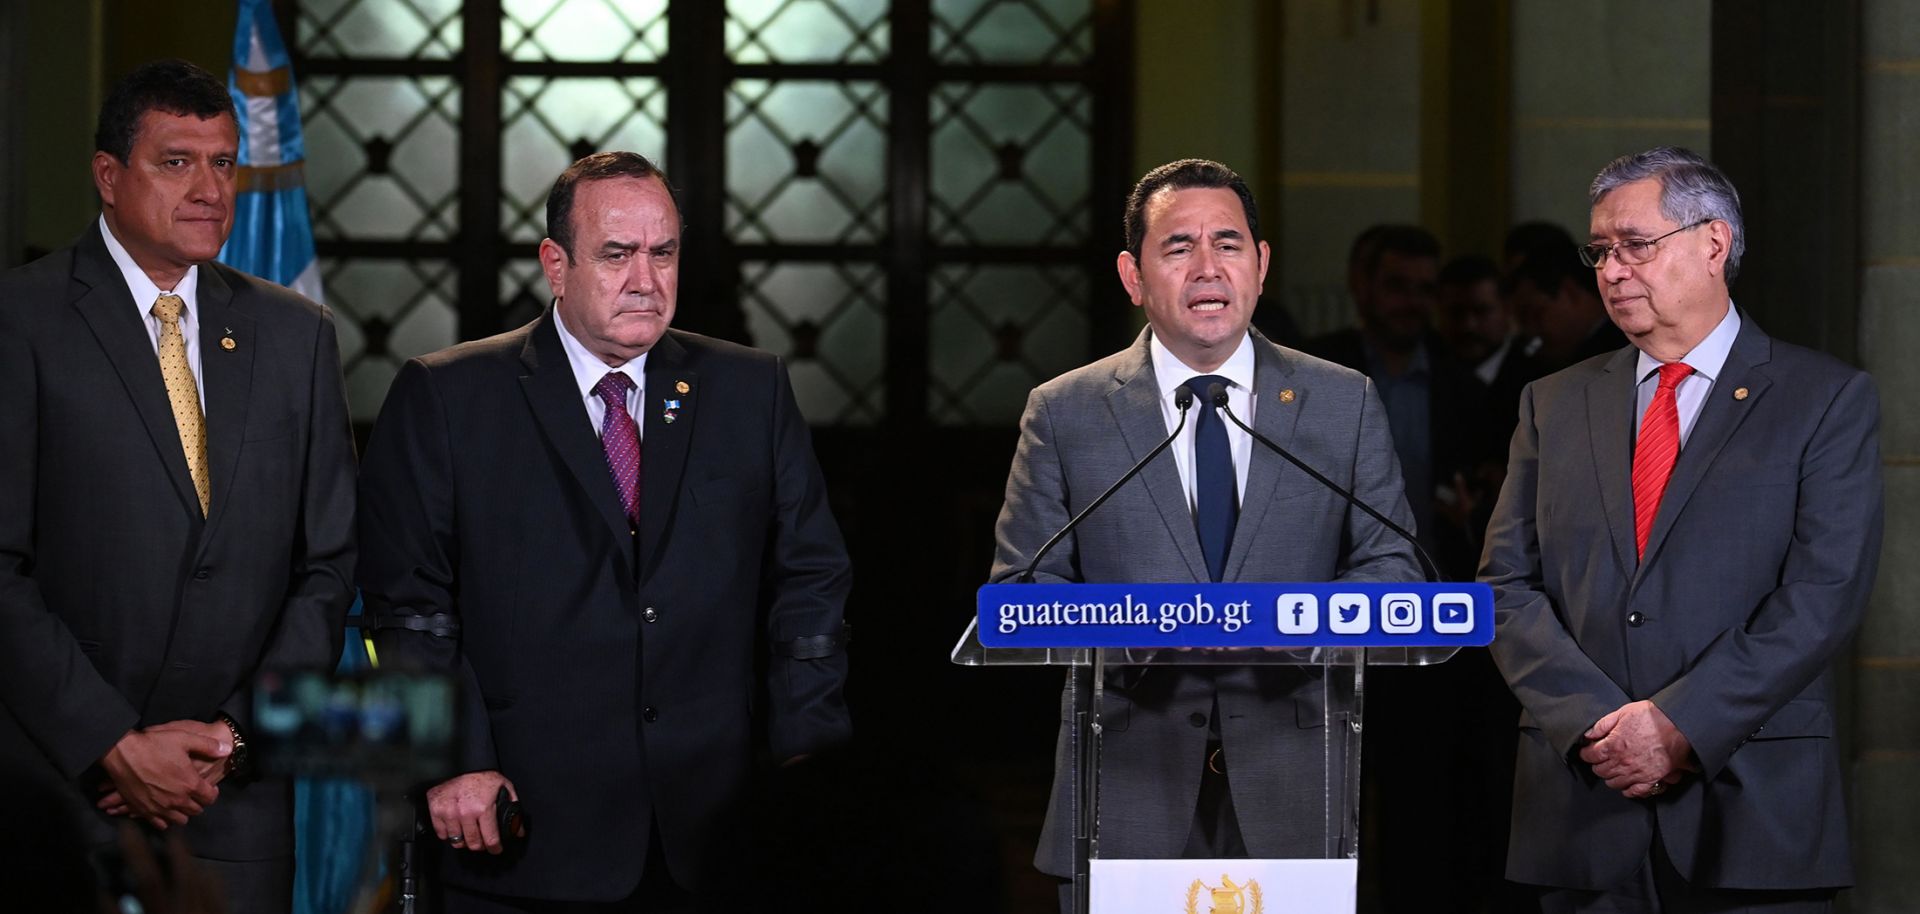 This photo shows Guatemalan President Jimmy Morales speaking to reporters during a news conference in Guatemala City on Aug. 14, 2019.